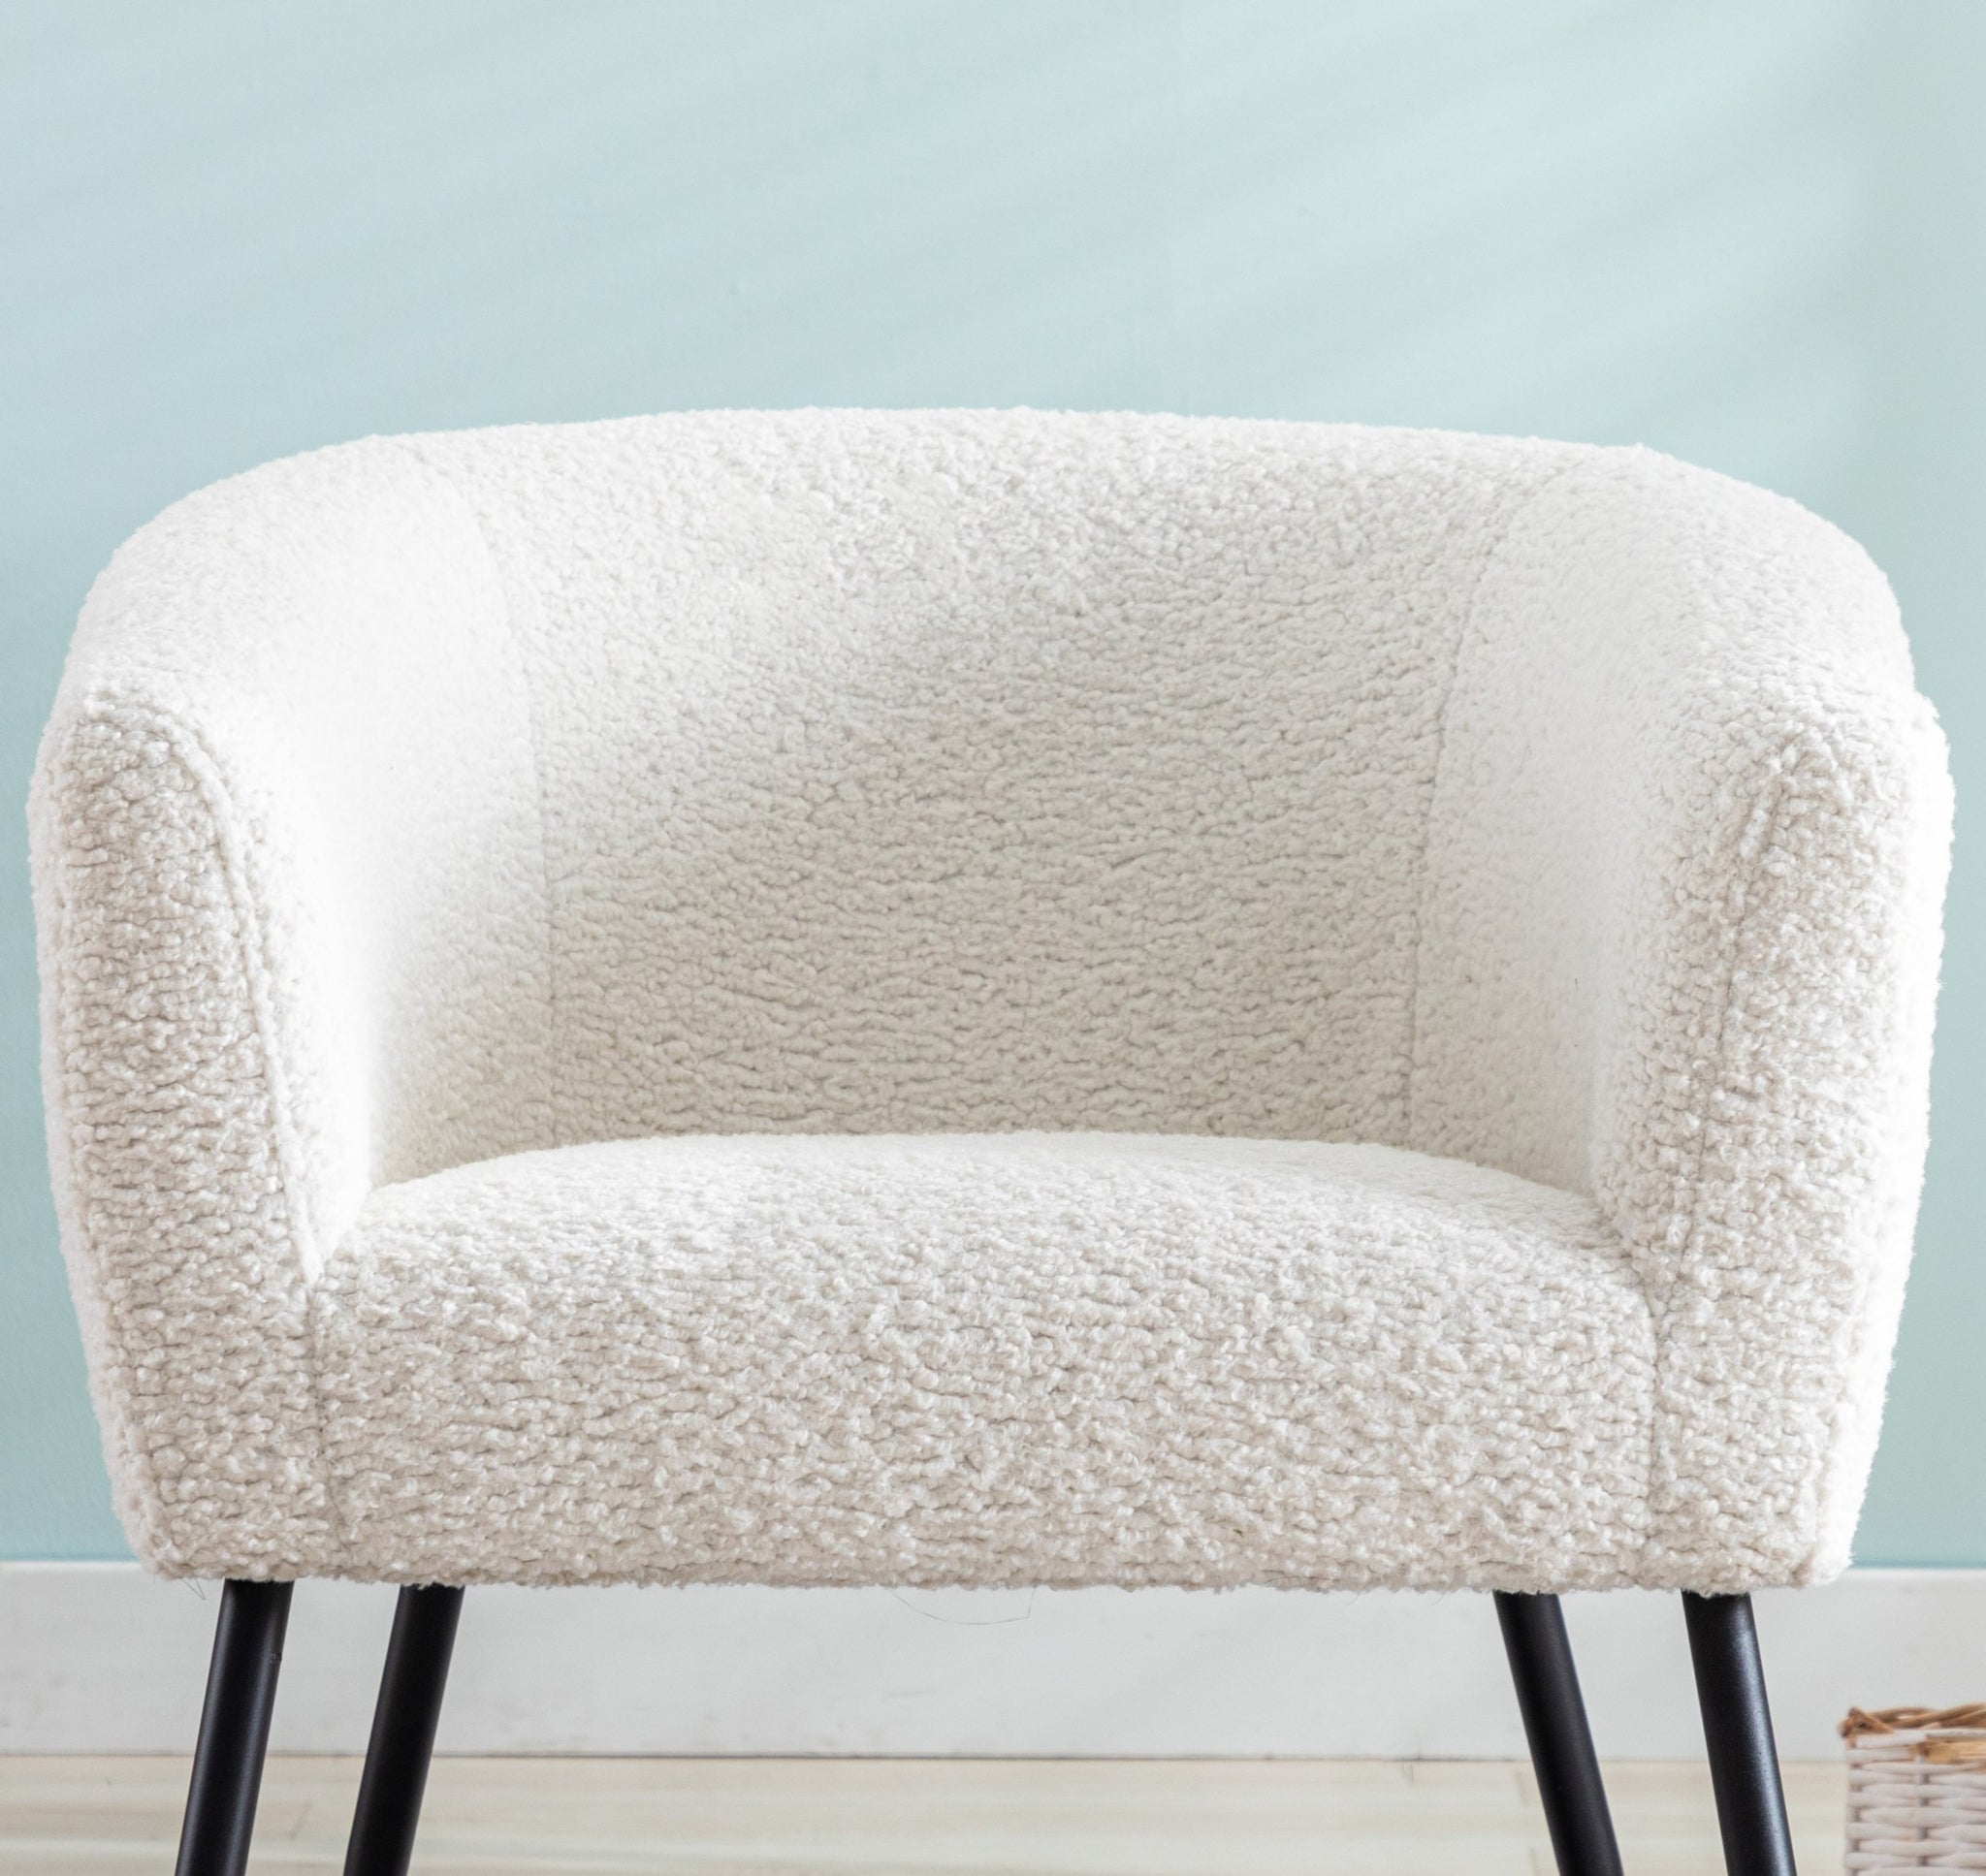 Modern Style 1pc Accent Chair White Sheep Wool Like white-primary living space-luxury-fabric